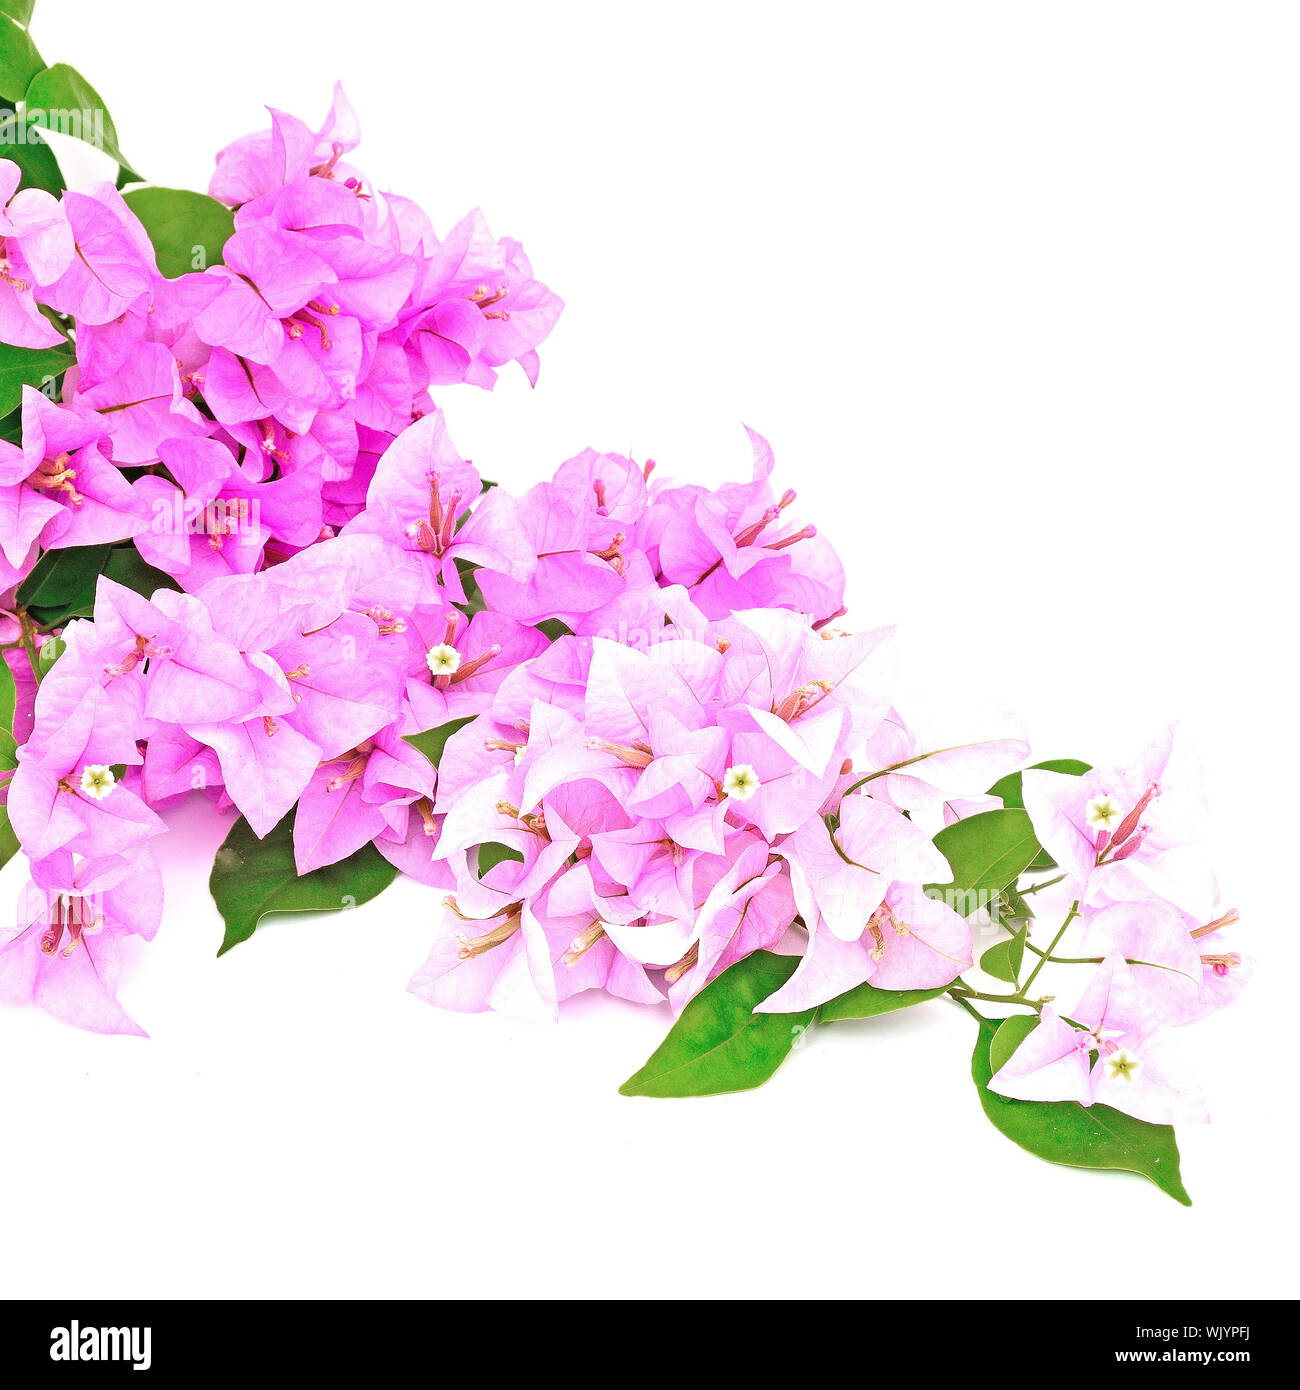 Tropical Bougainvillea flower, isolated on a white background Stock Photo